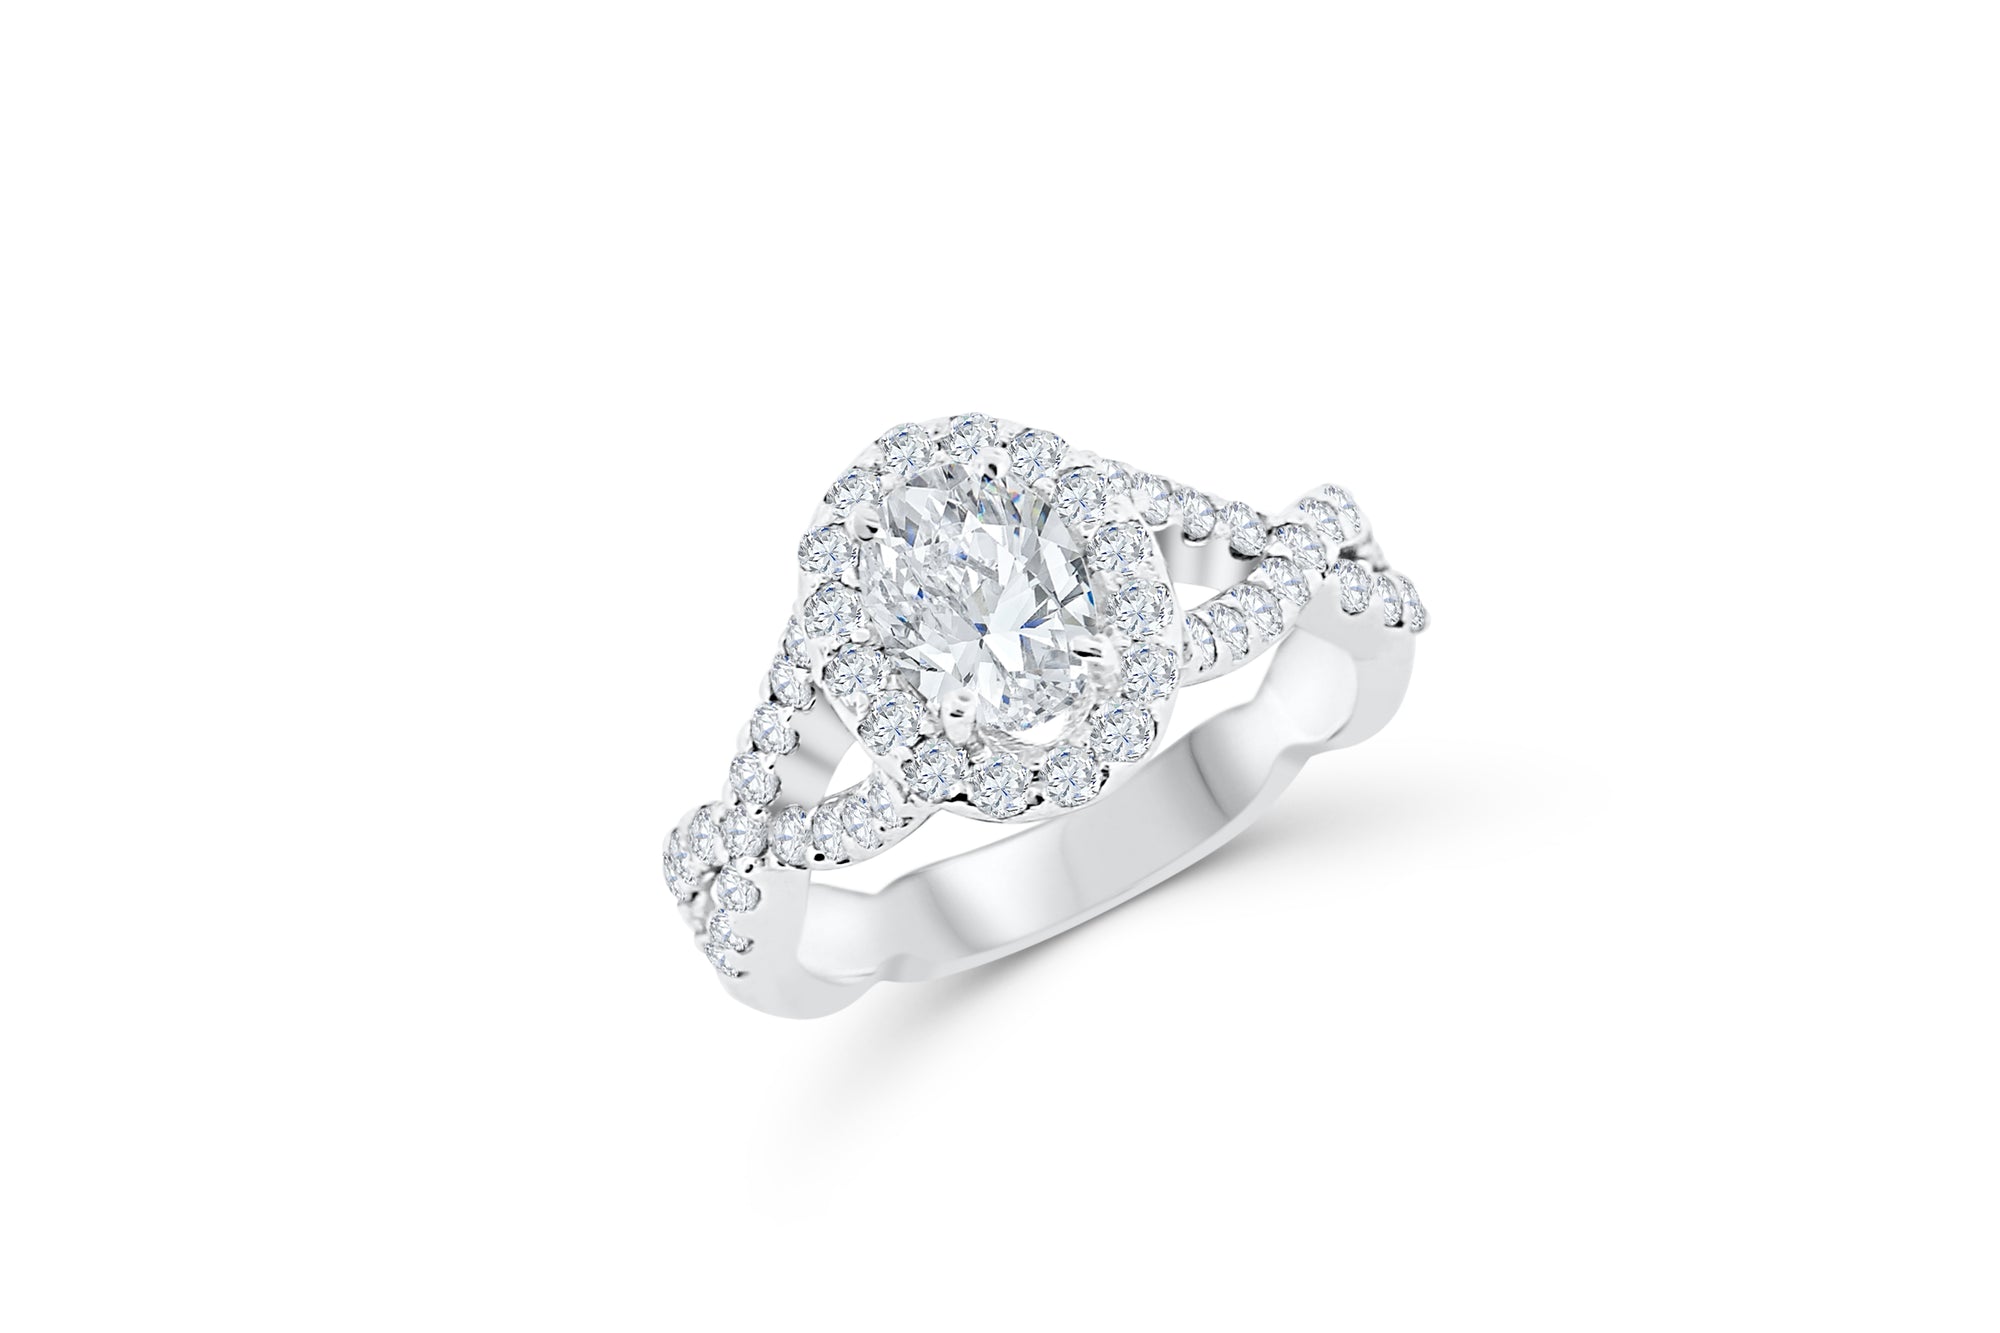 Oval Diamond Engagement Ring 1.61 ct tw 14K White Gold DENG043 - NorthandSouthJewelry